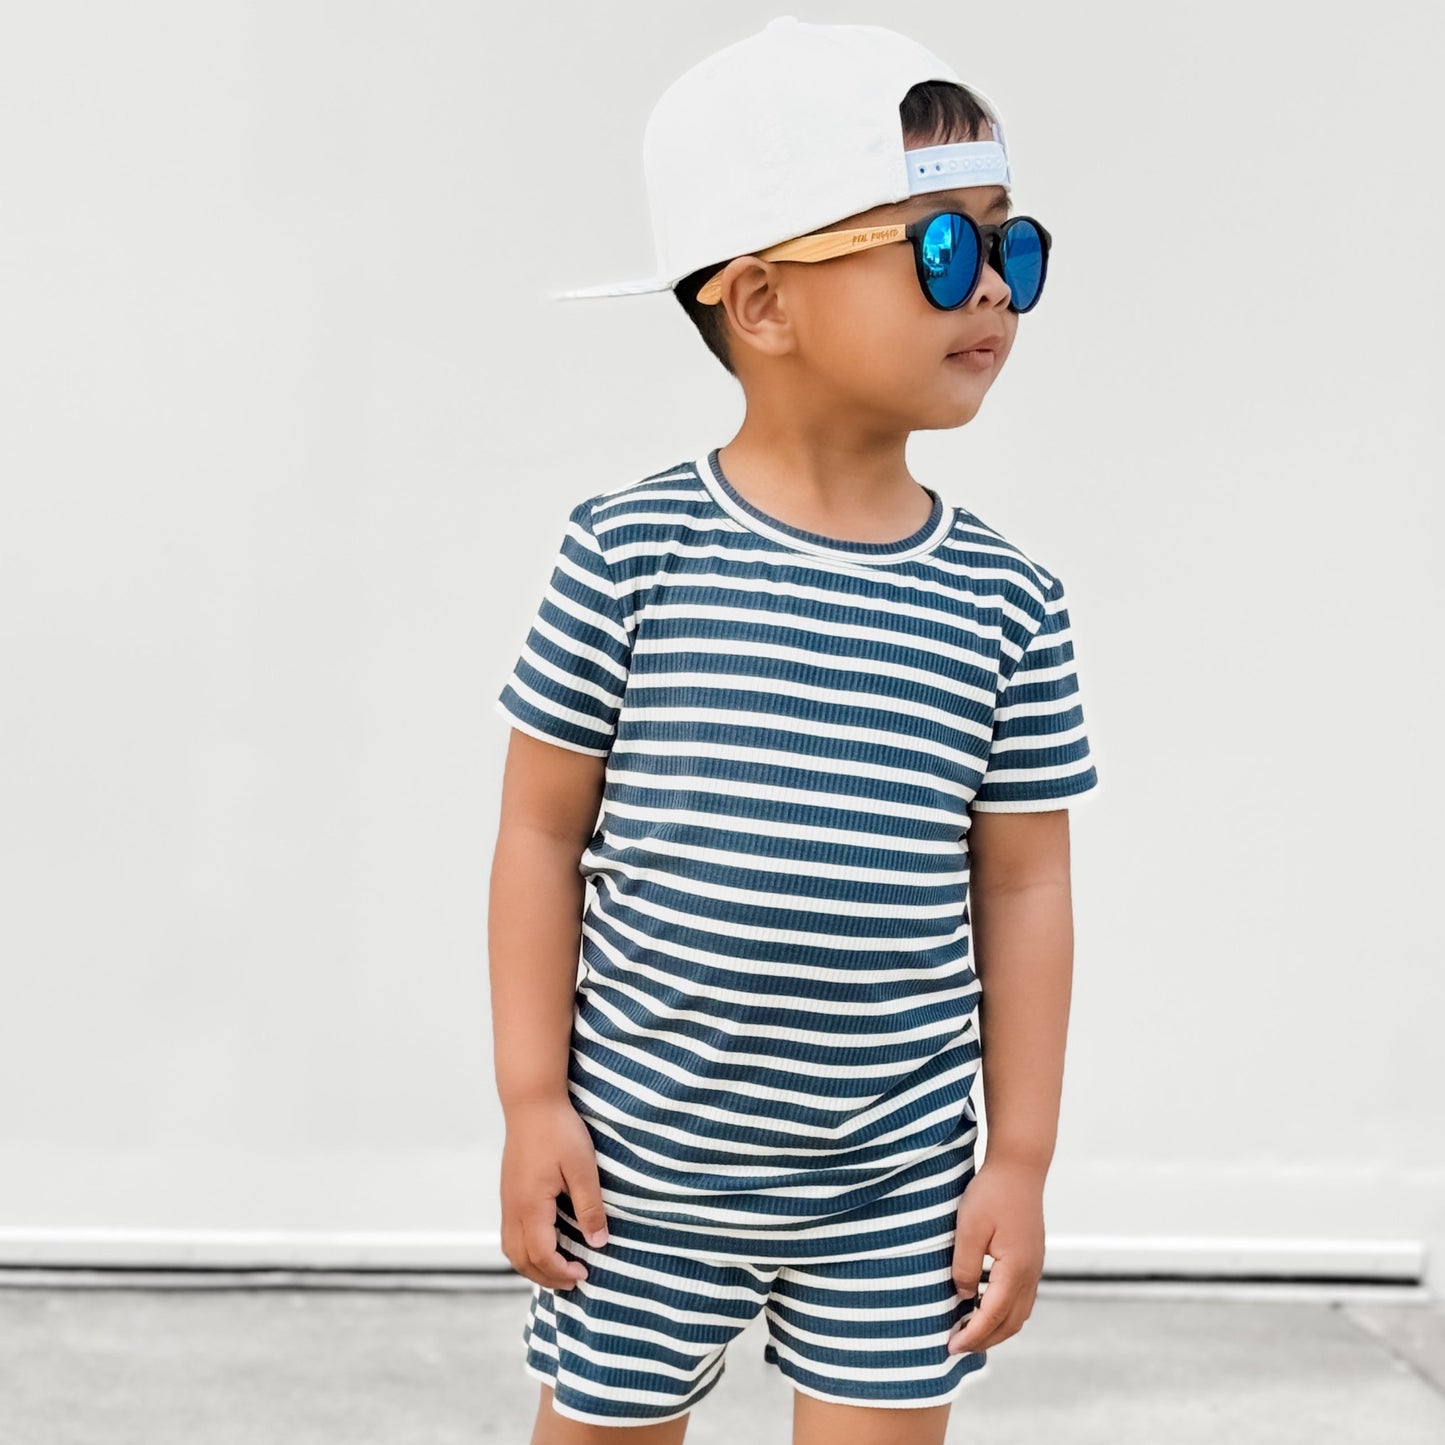 Nautical Blue Stripe Small Ribbed Shorts Two-Piece Set